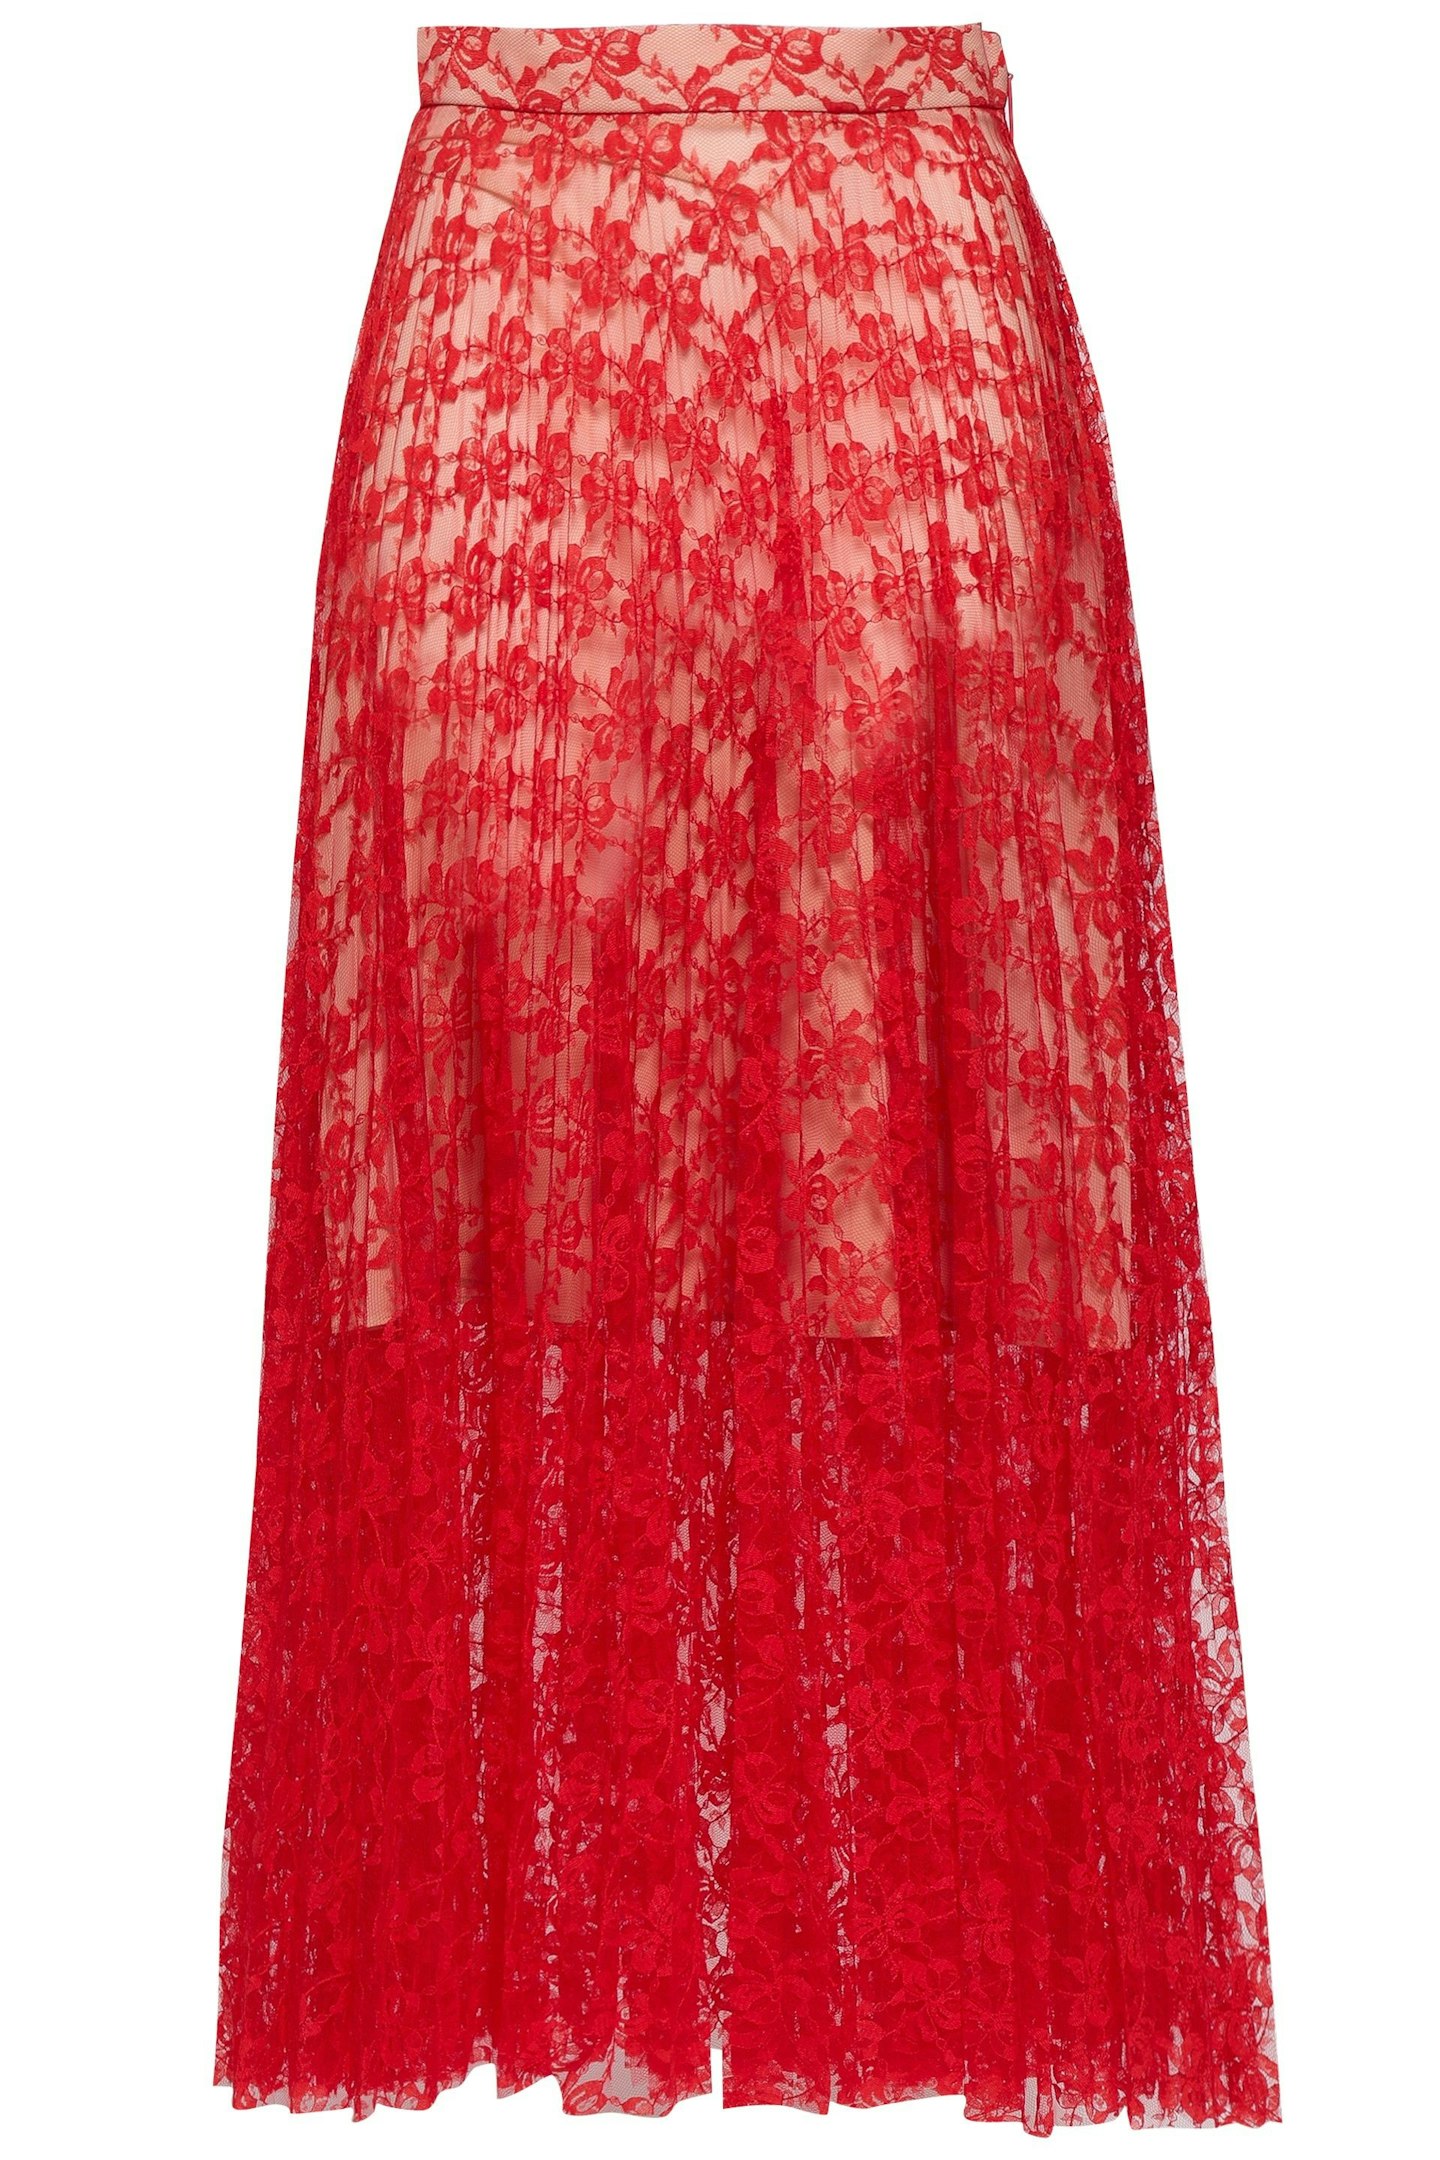 Christopher Kane, Red Lace Skirt, £445